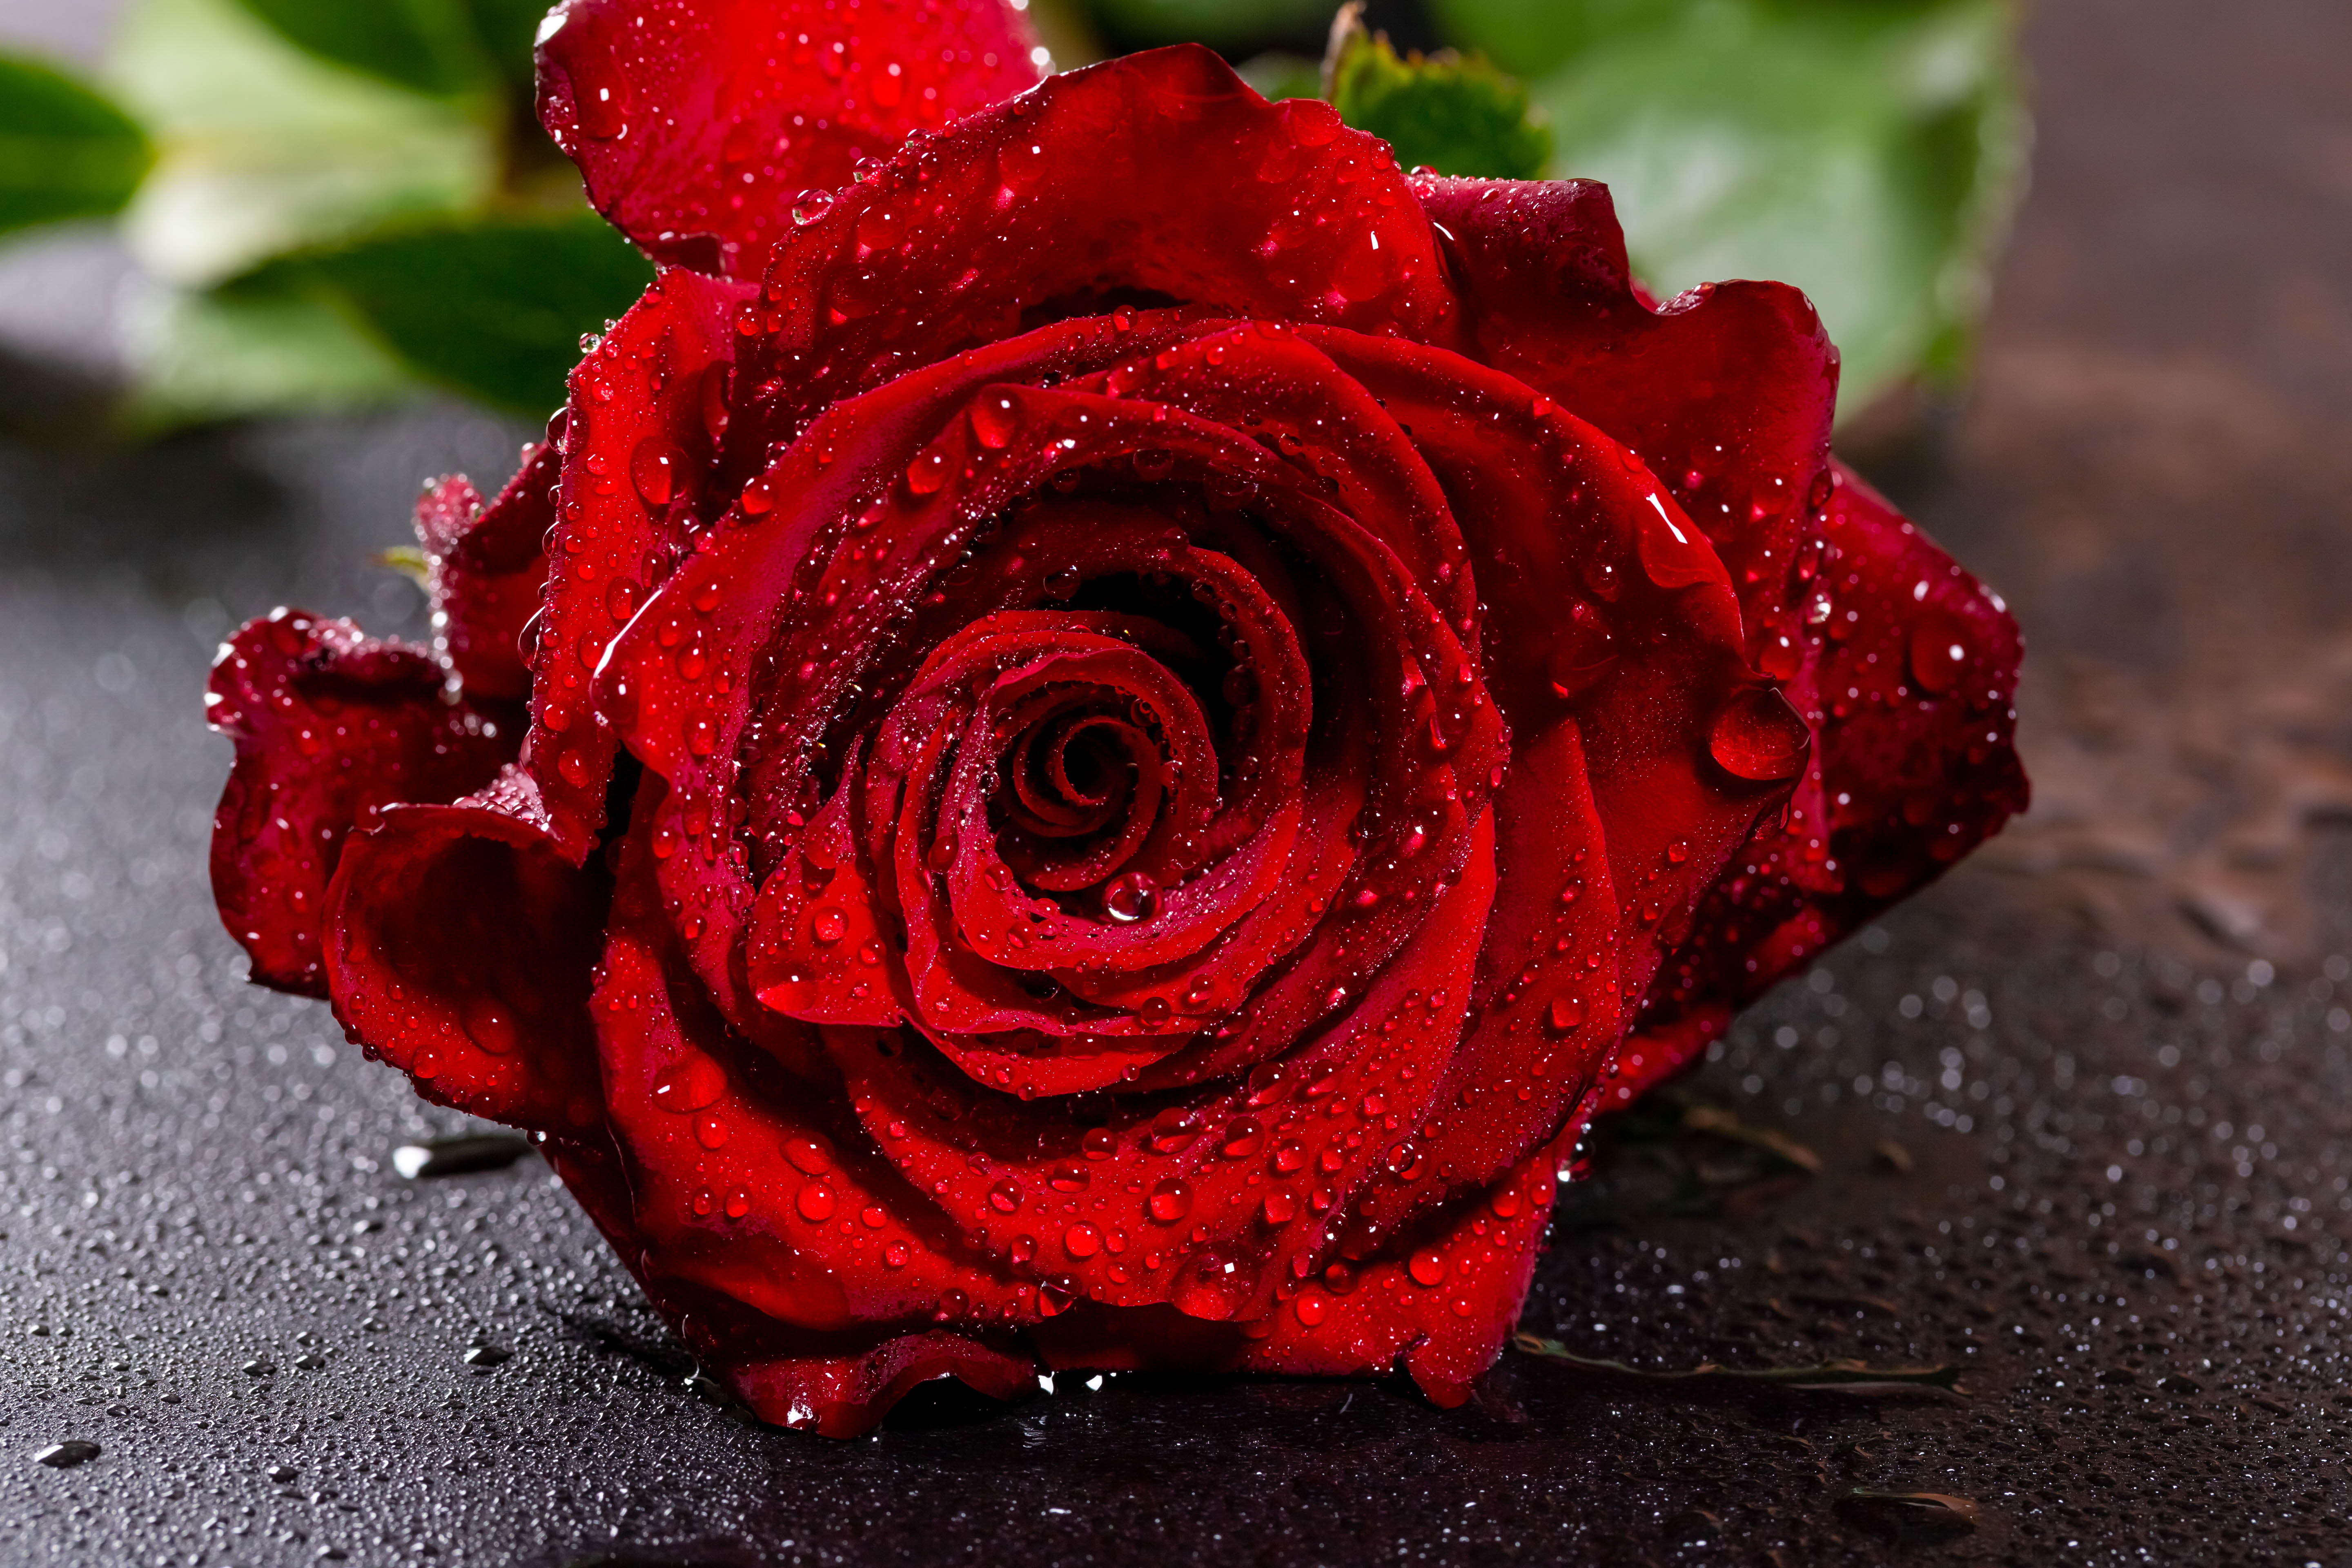 drops, rose flower, flowers, red, rose, petals, wet phone background